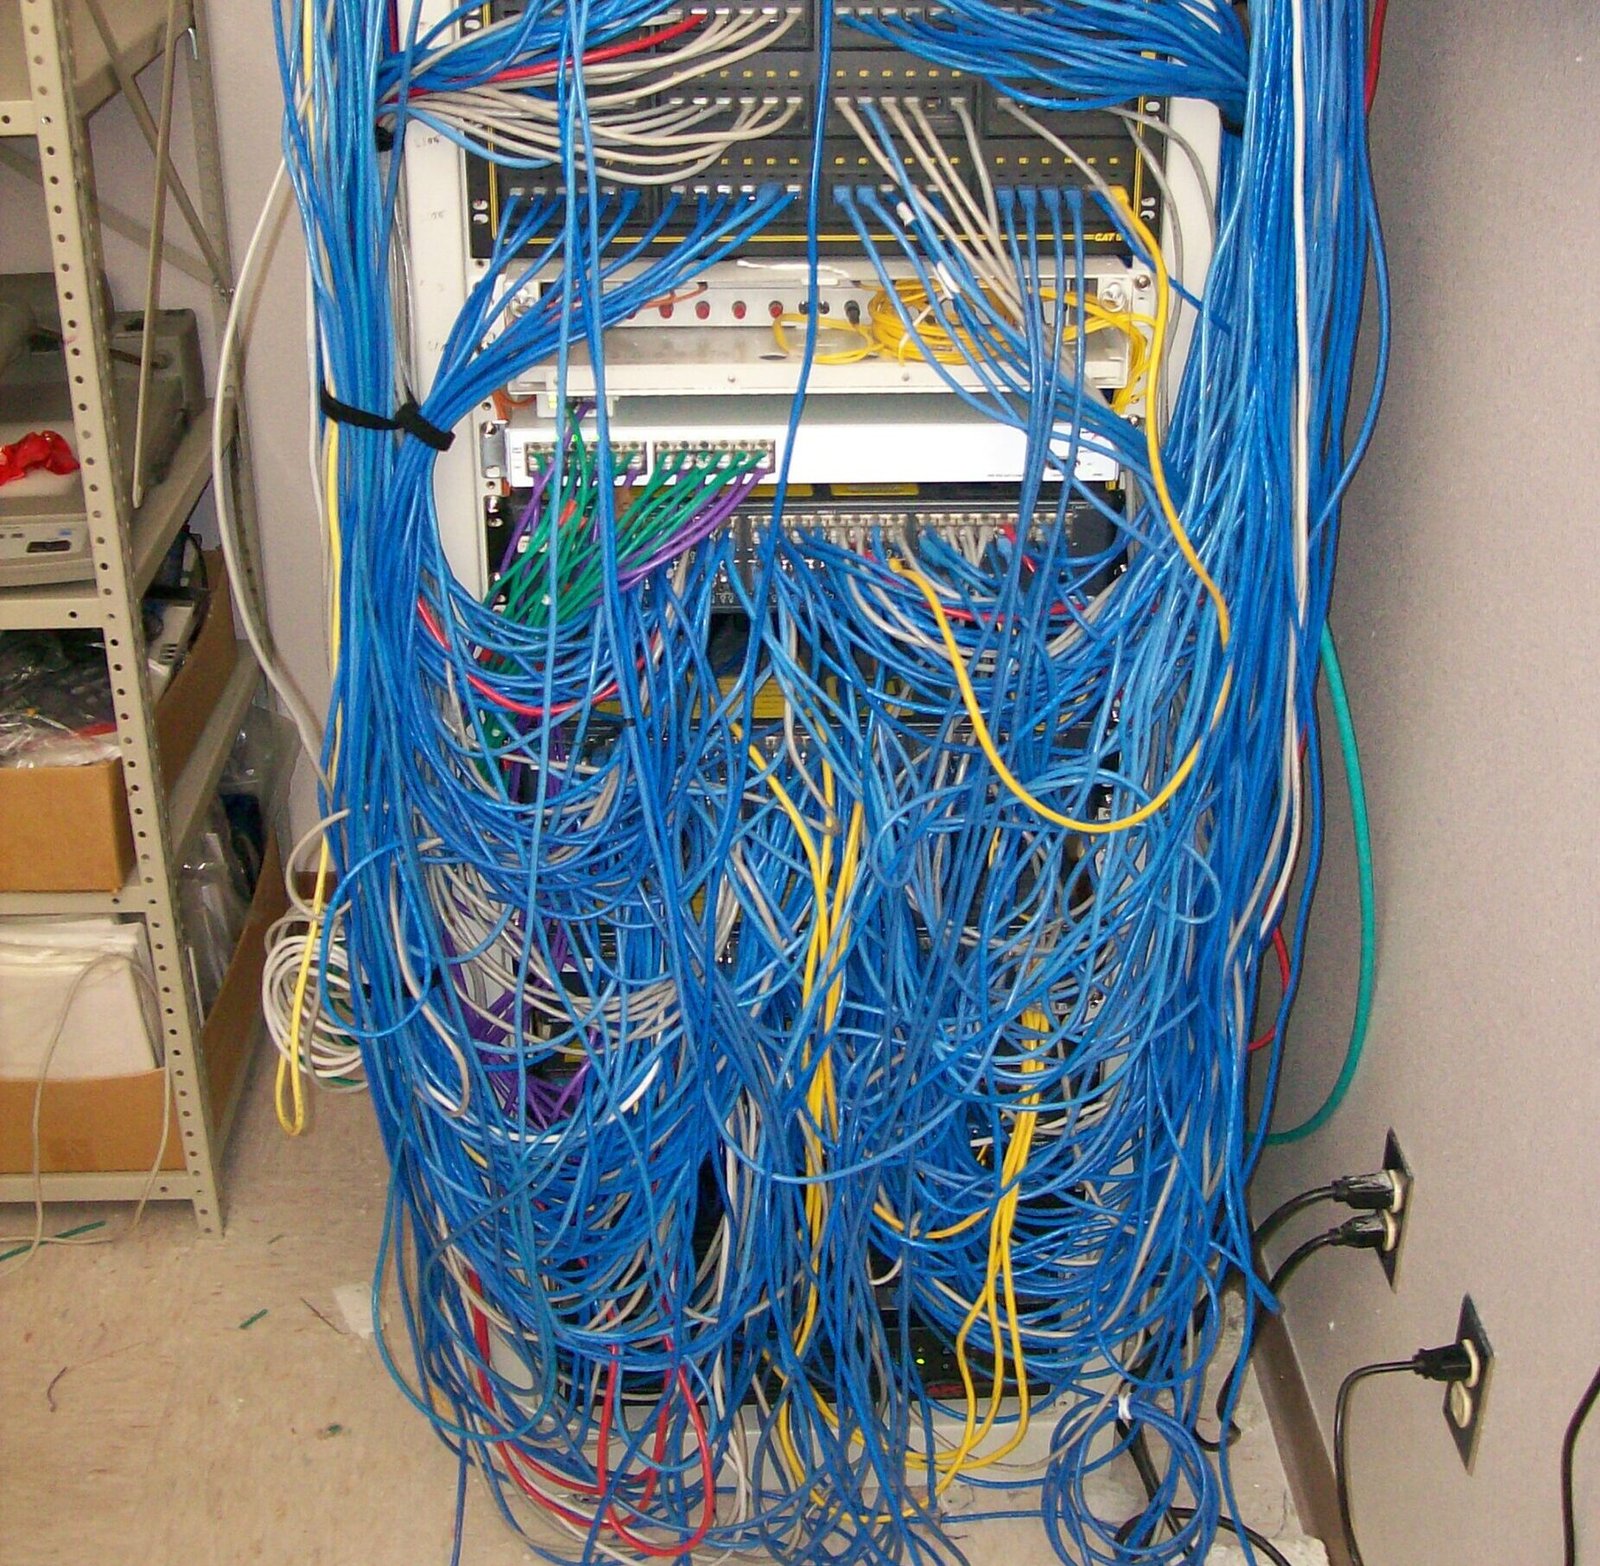 Network rack with a significant mess of network cables